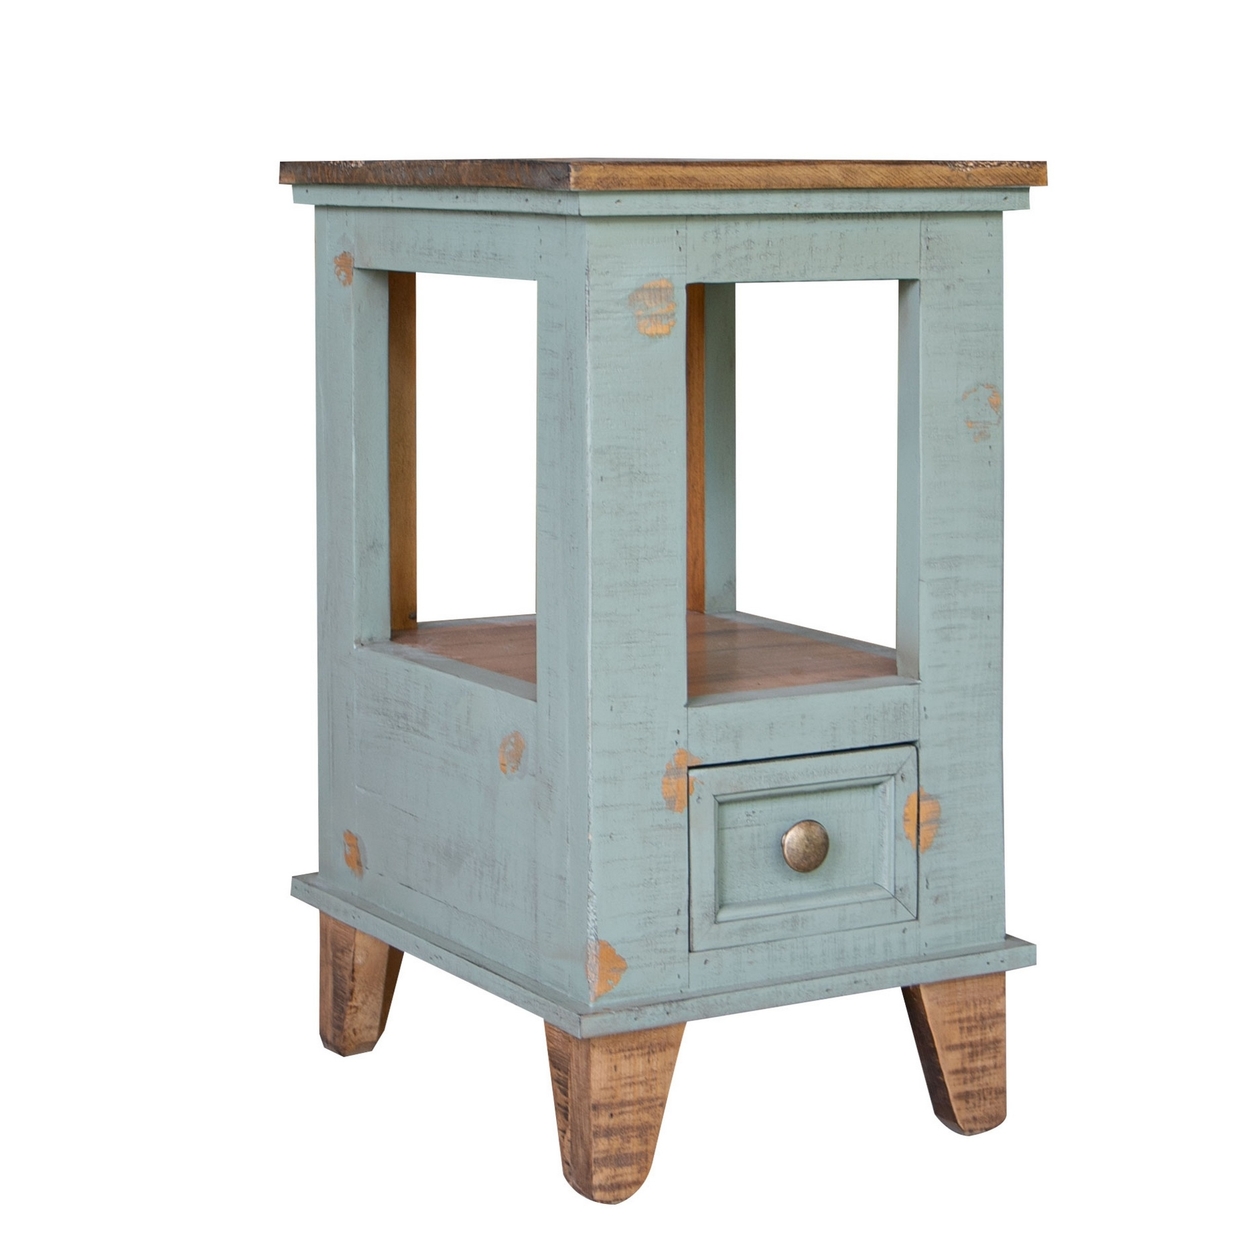 Rozy 26 Inch Chairside End Table, Teal Blue Pine Wood, Hand Finished- Saltoro Sherpi